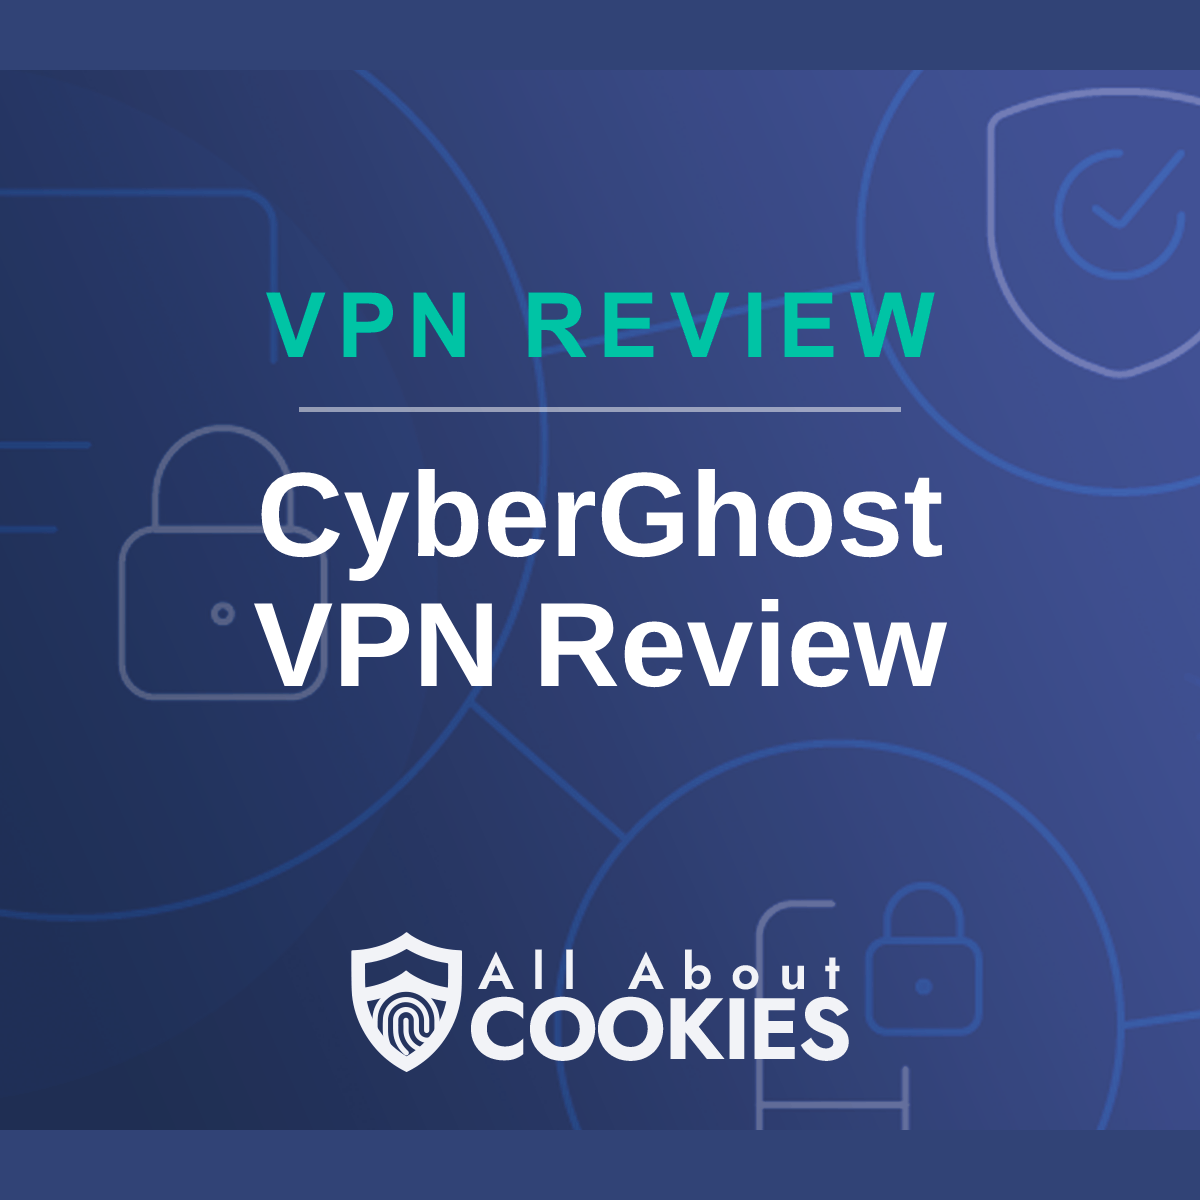 A blue background with images of locks and shields with the text &quot;CyberGhost VPN Review&quot; and the All About Cookies logo. 